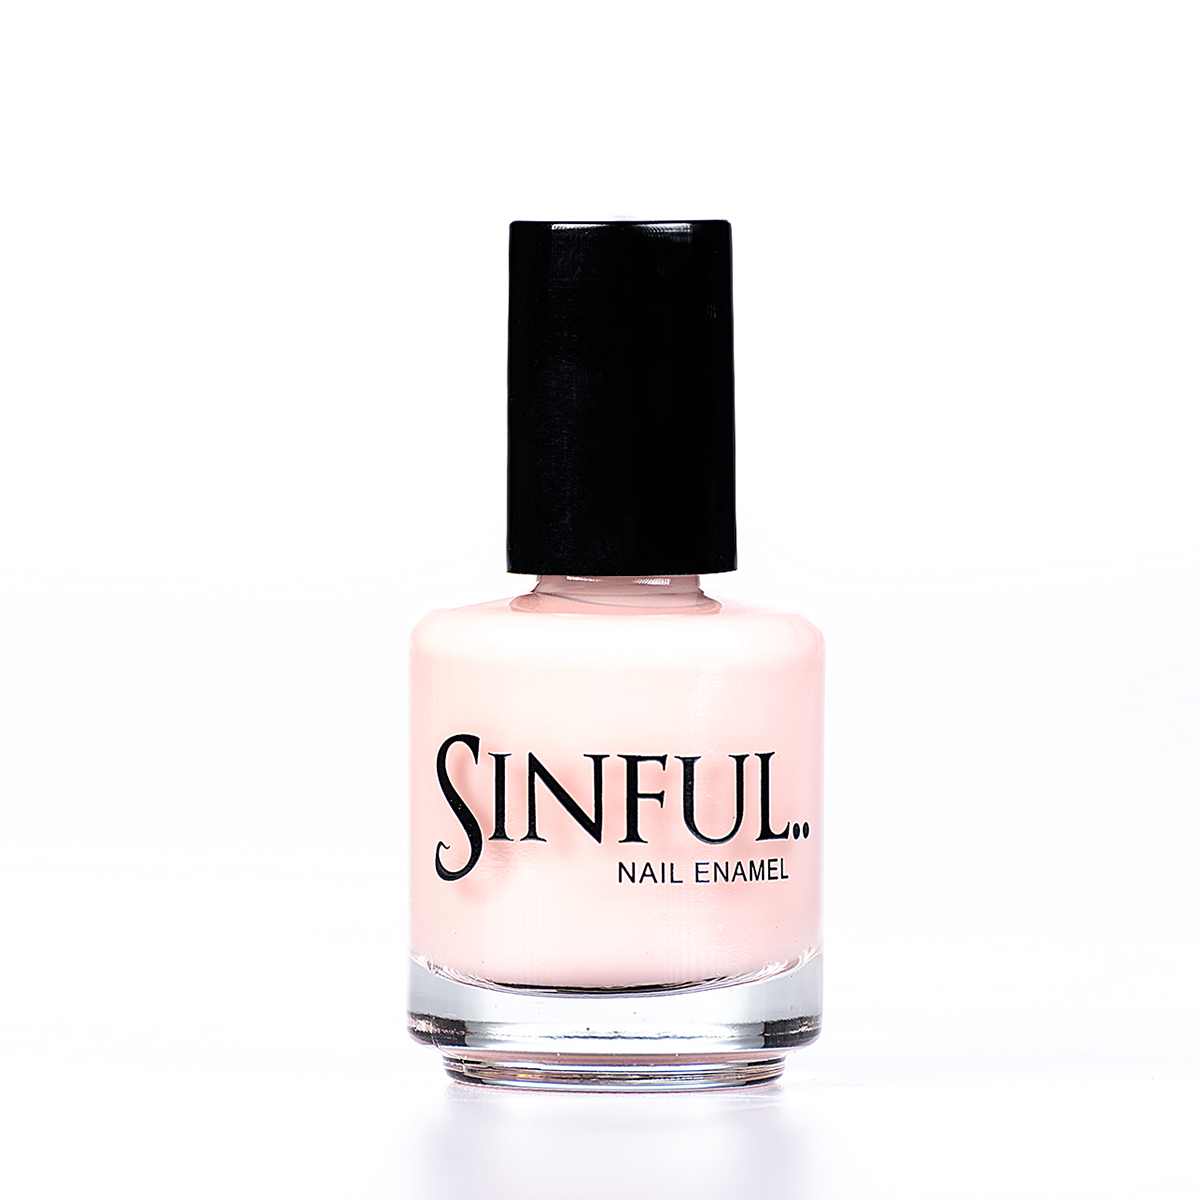 Nude A pale flesh shade - perfect for any skin tone and any occasion. Sinful always recommends applying two coats of polish to give a solid colour, then applying top coat to extend the wear-time of the polish. 15ml